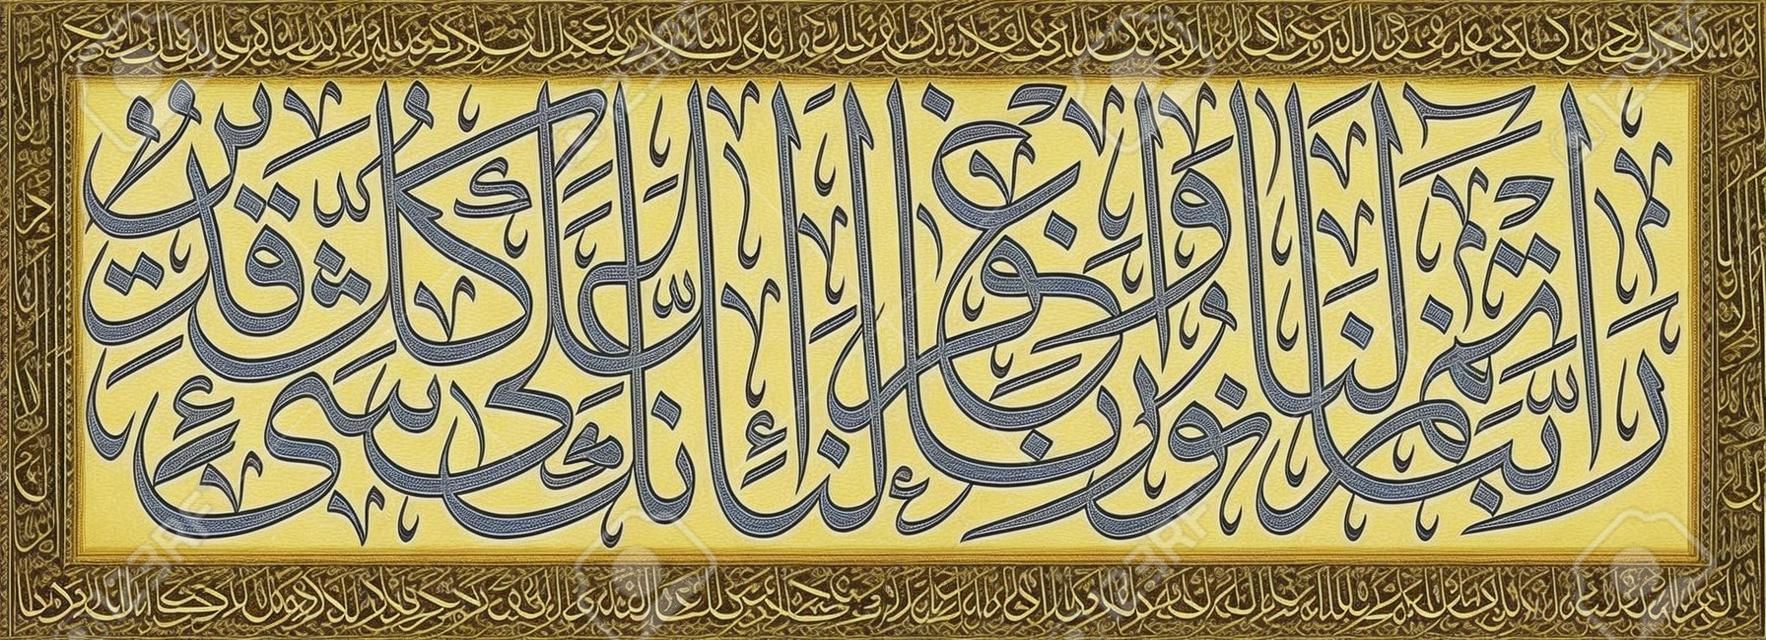 Islamic calligraphy from the Quran, Surah 66 verse 8. -Our Lord Give us full light and forgive us. Indeed, You are capable of anything."